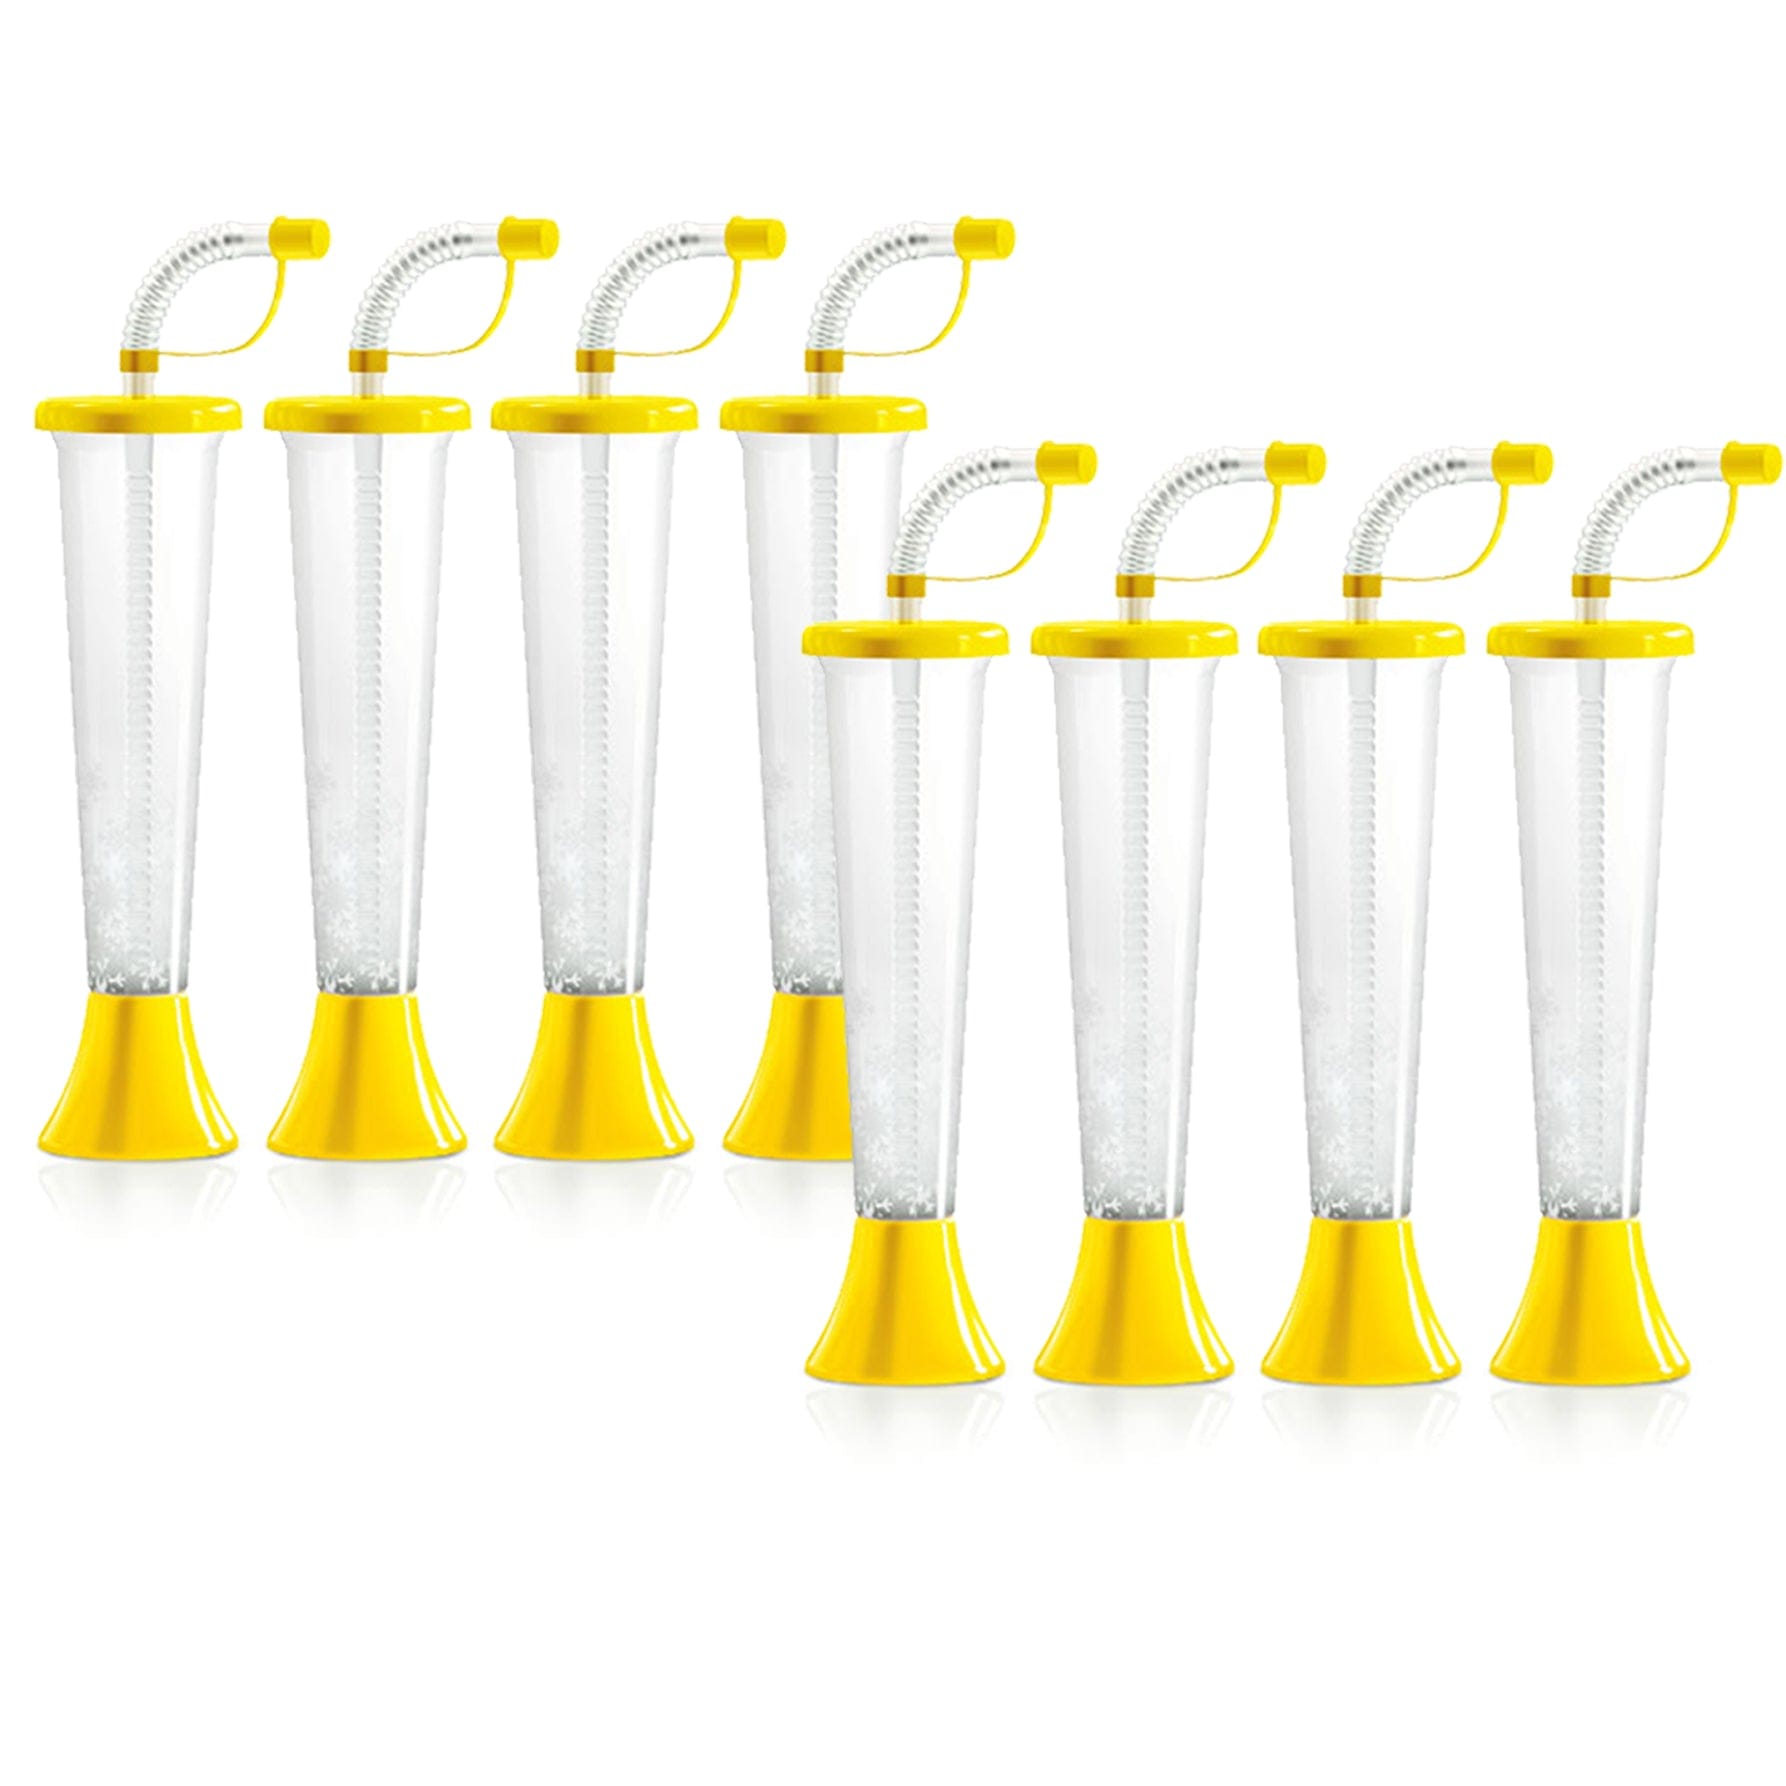 http://noveltycupsusa.com/cdn/shop/products/sweet-world-usa-yard-cups-party-pack-yard-cups-for-kids-108-yellow-cups-for-cold-drinks-frozen-drinks-kids-parties-9-oz-250-ml-sw-47205-cups-with-lids-and-straws-32801206304927.jpg?v=1656603552